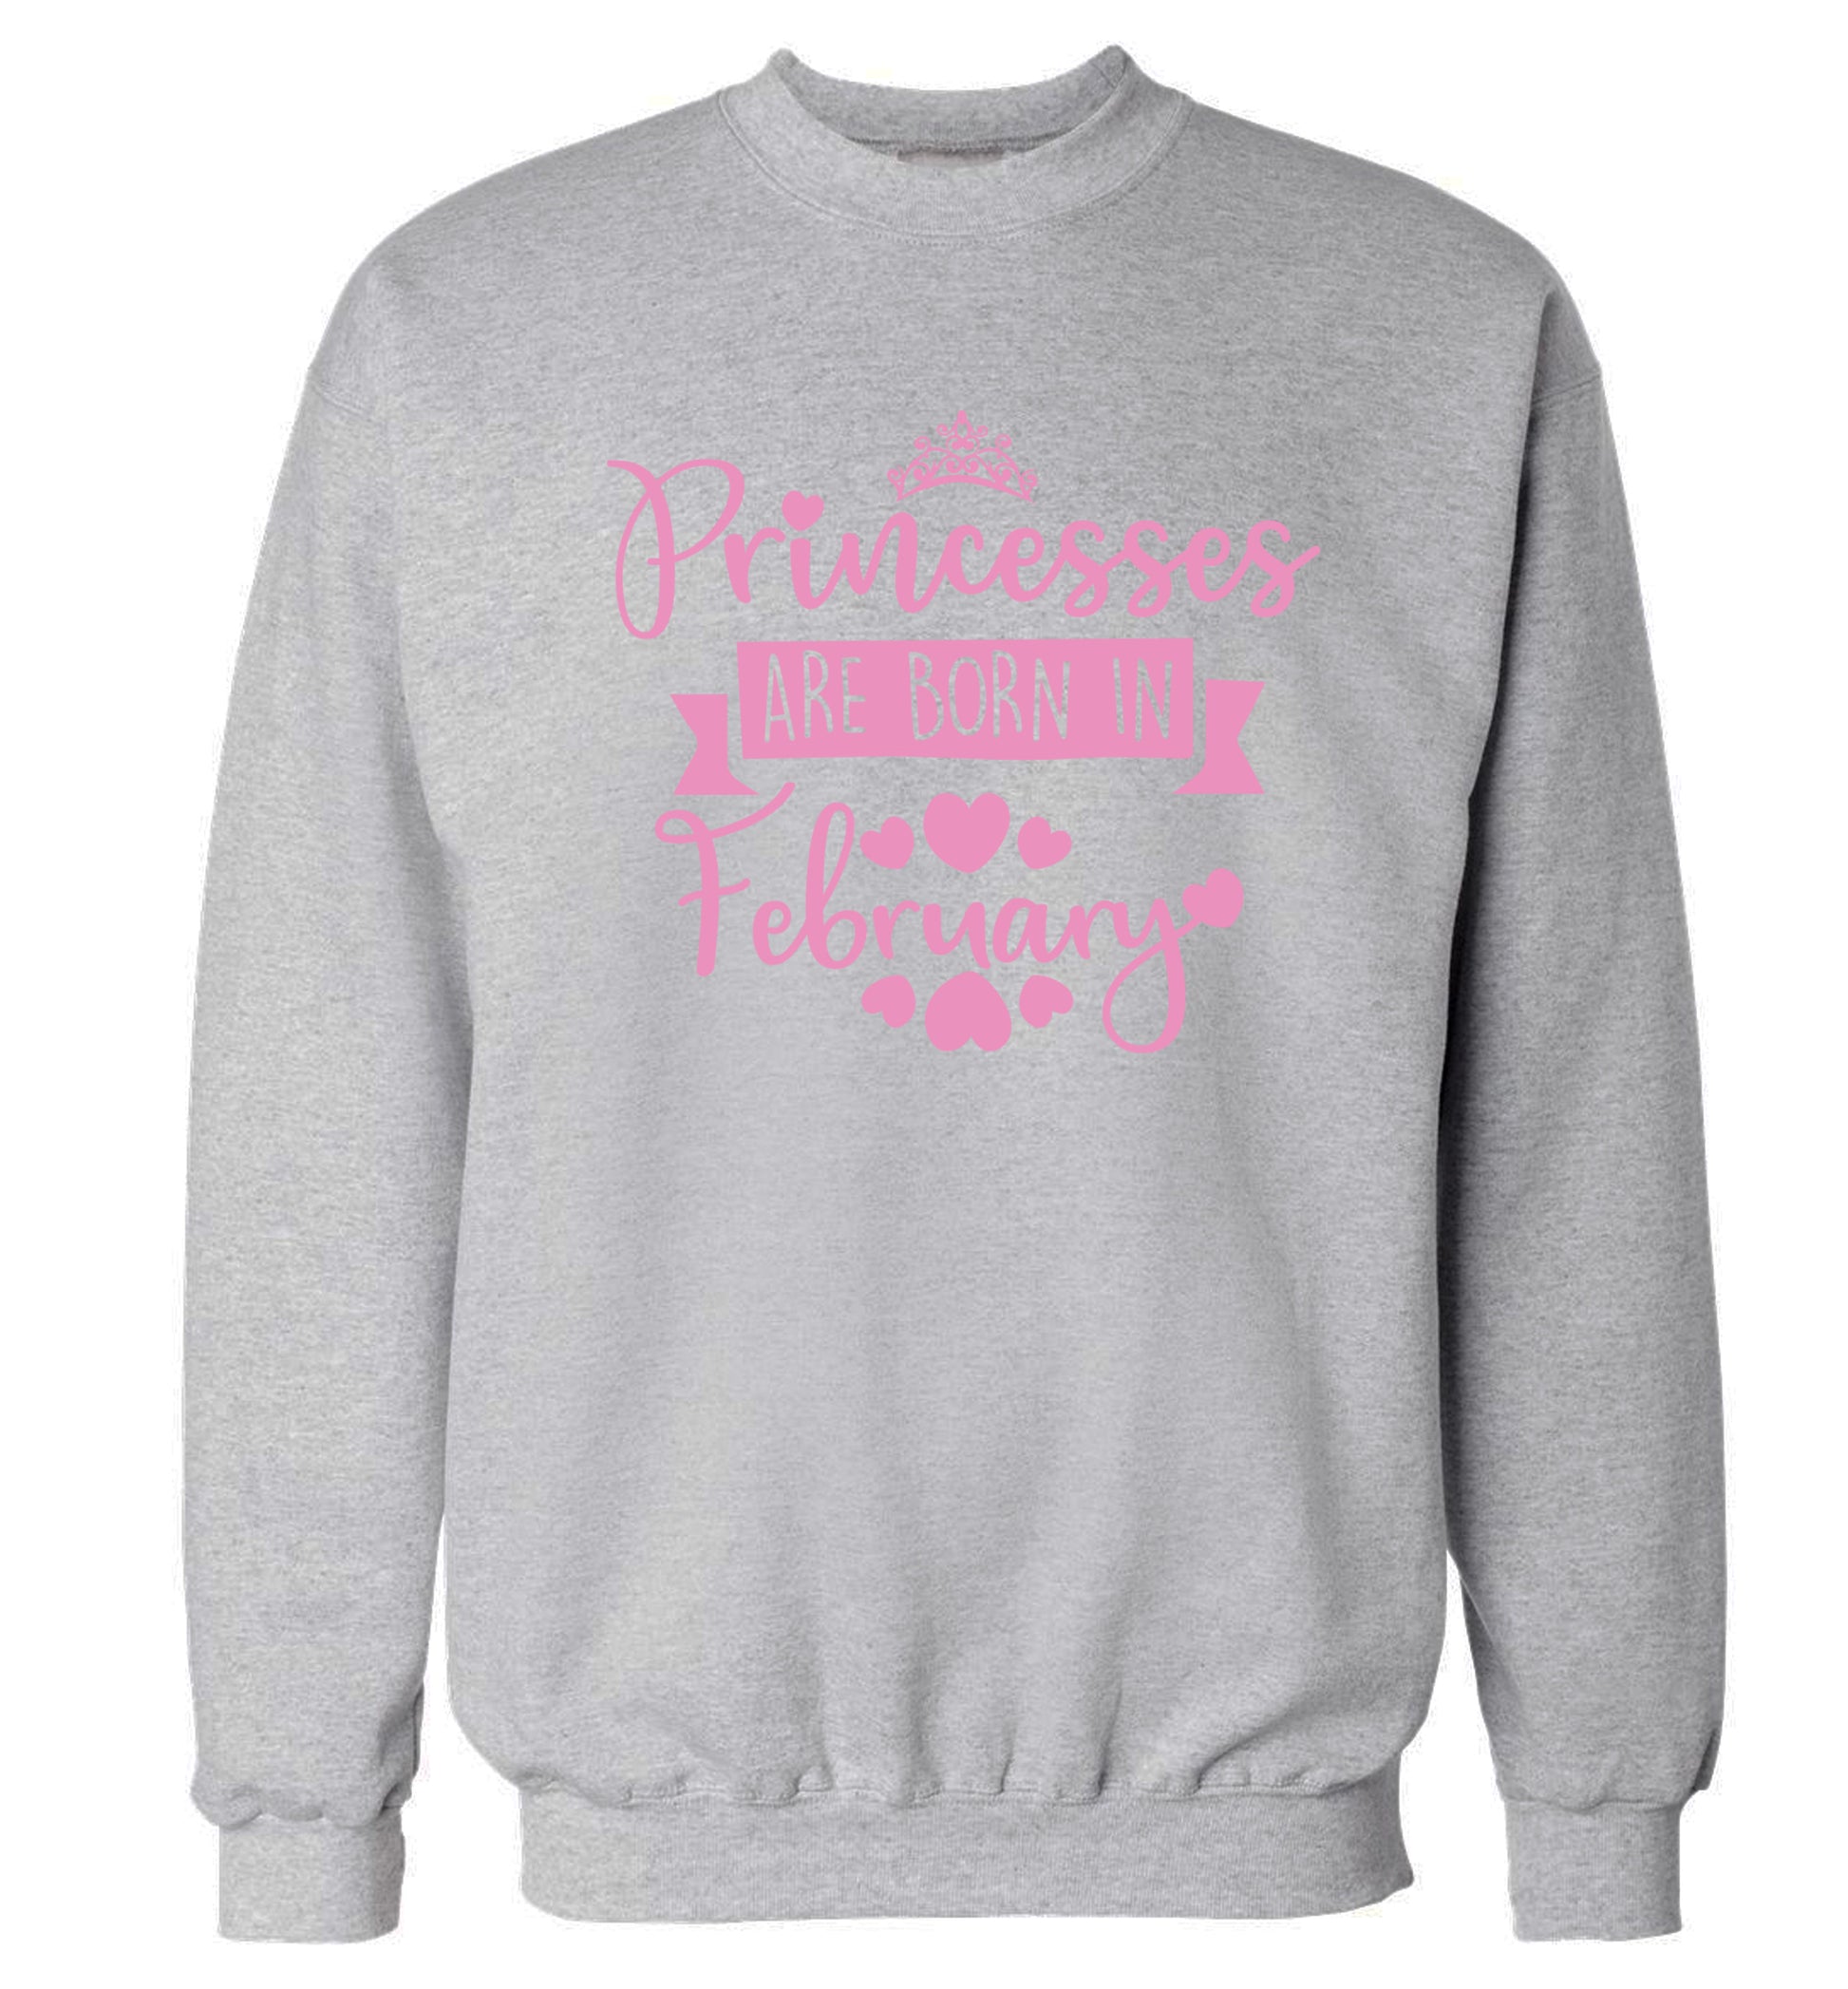 Princesses are born in February Adult's unisex grey Sweater 2XL